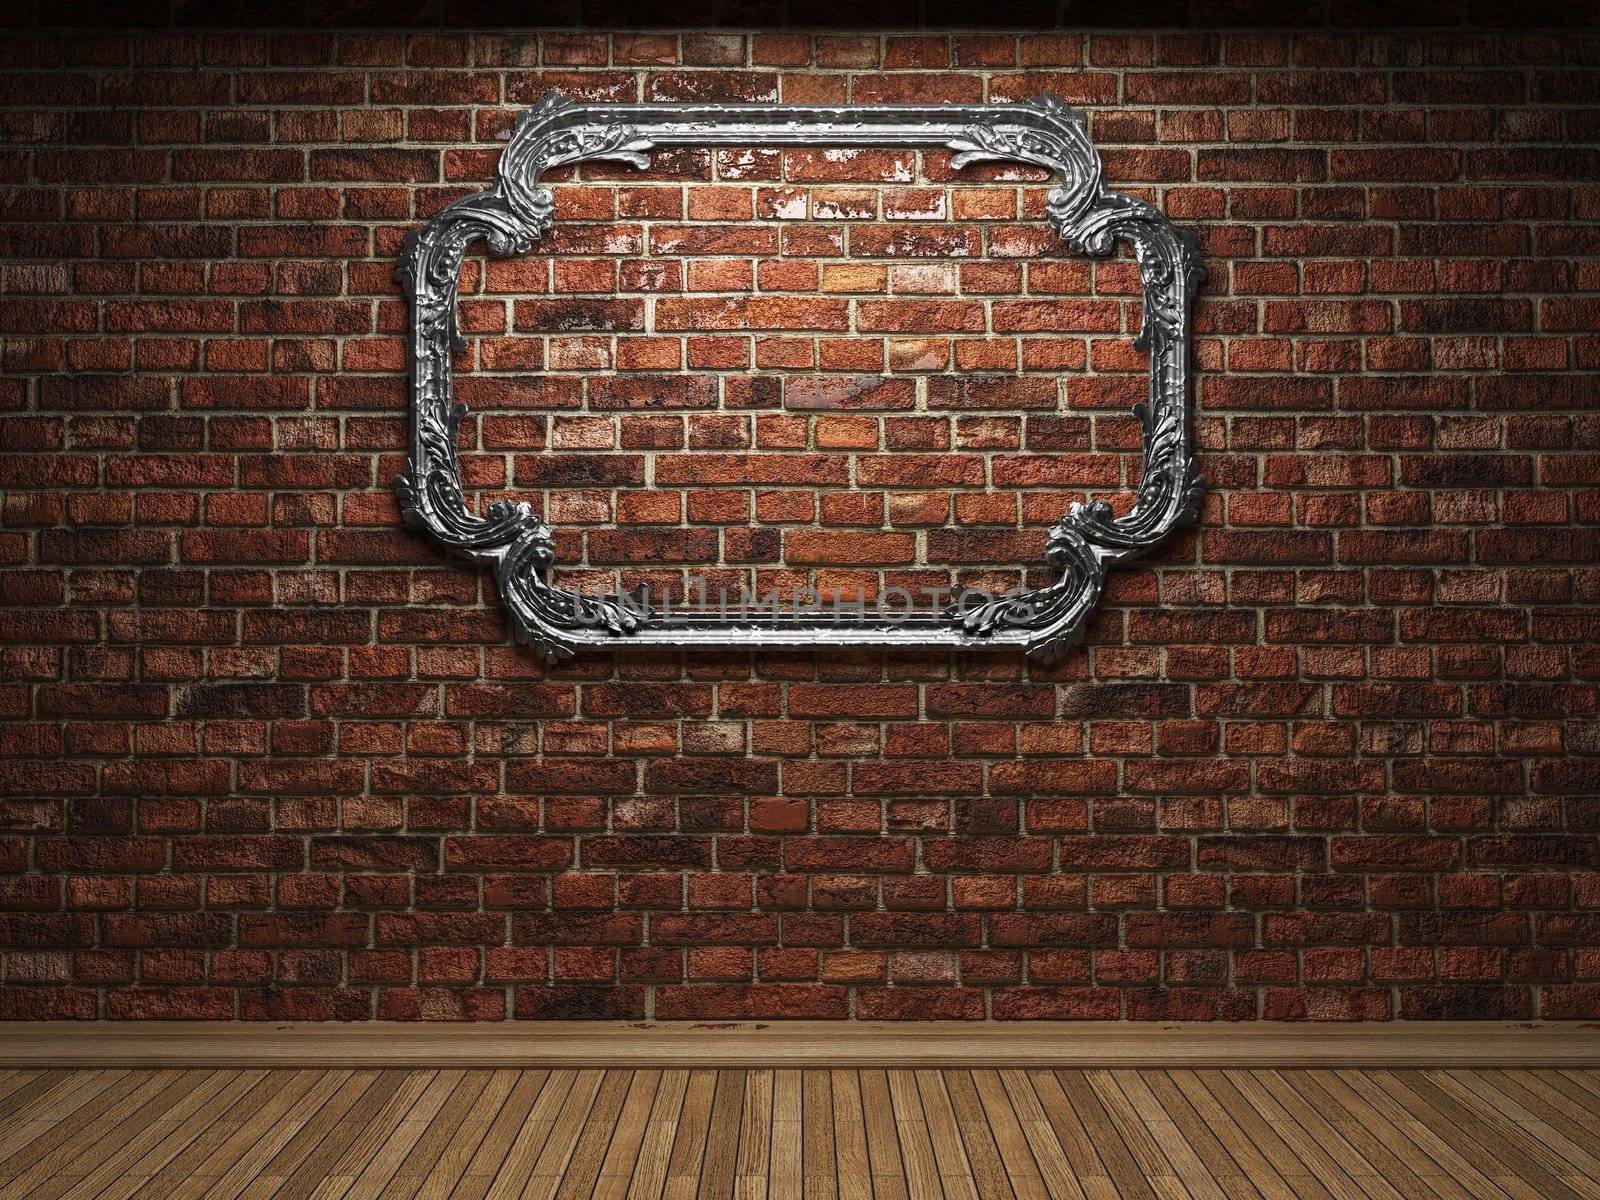 illuminated brick wall and frame made in 3D